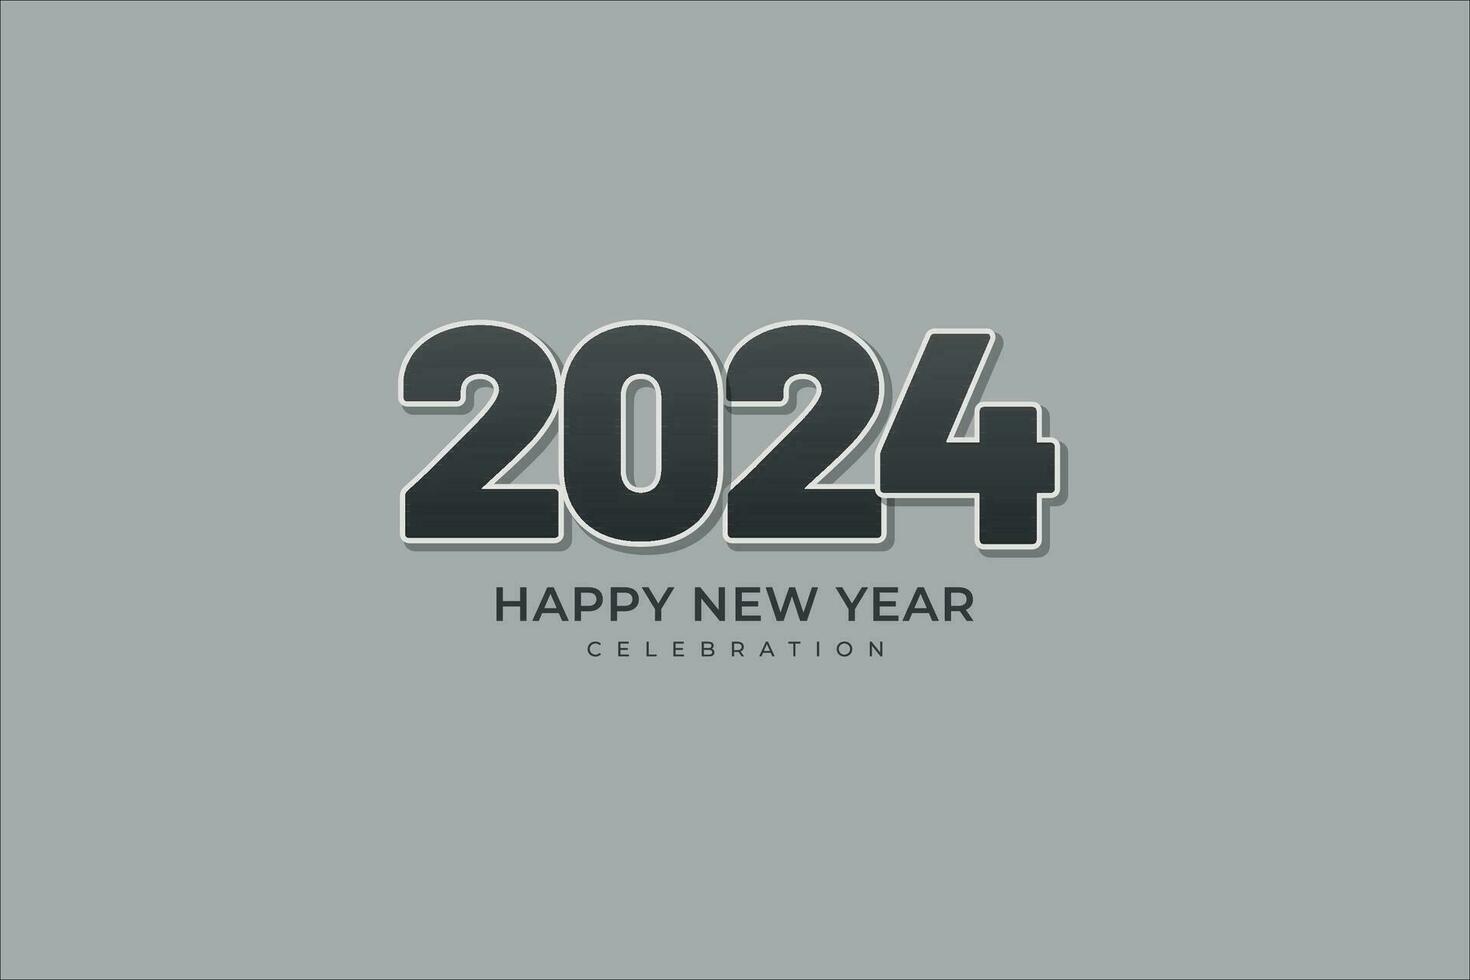 Happy New Year 2024. festive realistic decoration. Celebrate 2024 party on a silver background vector